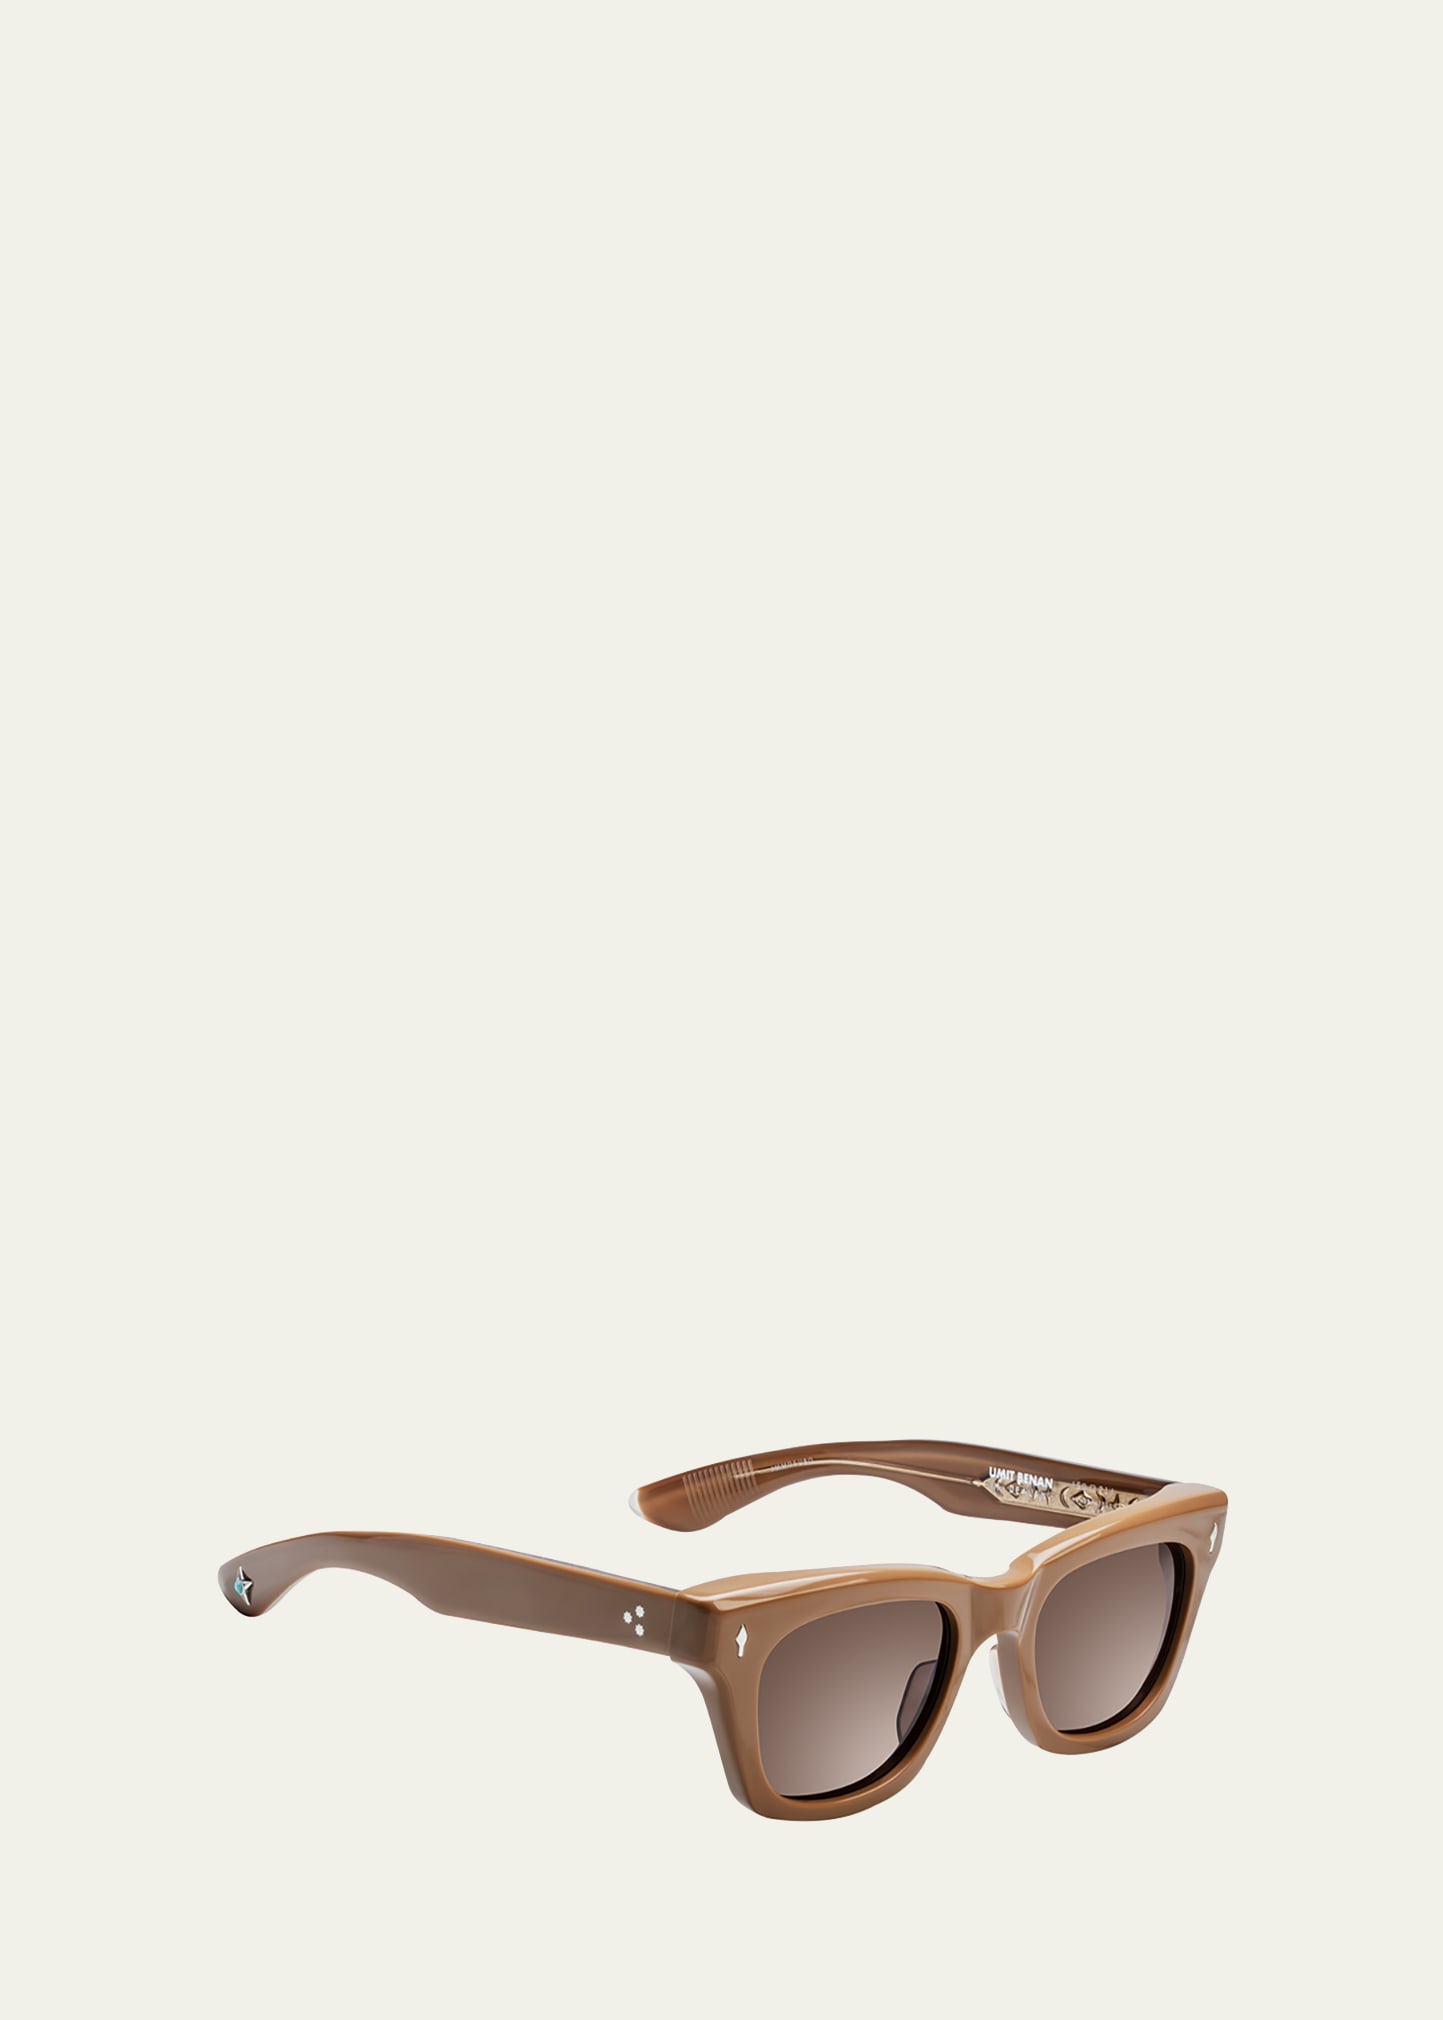 Jacques Marie Mage Men's Dealan Rectangle Acetate Sunglasses In Tobacco 2